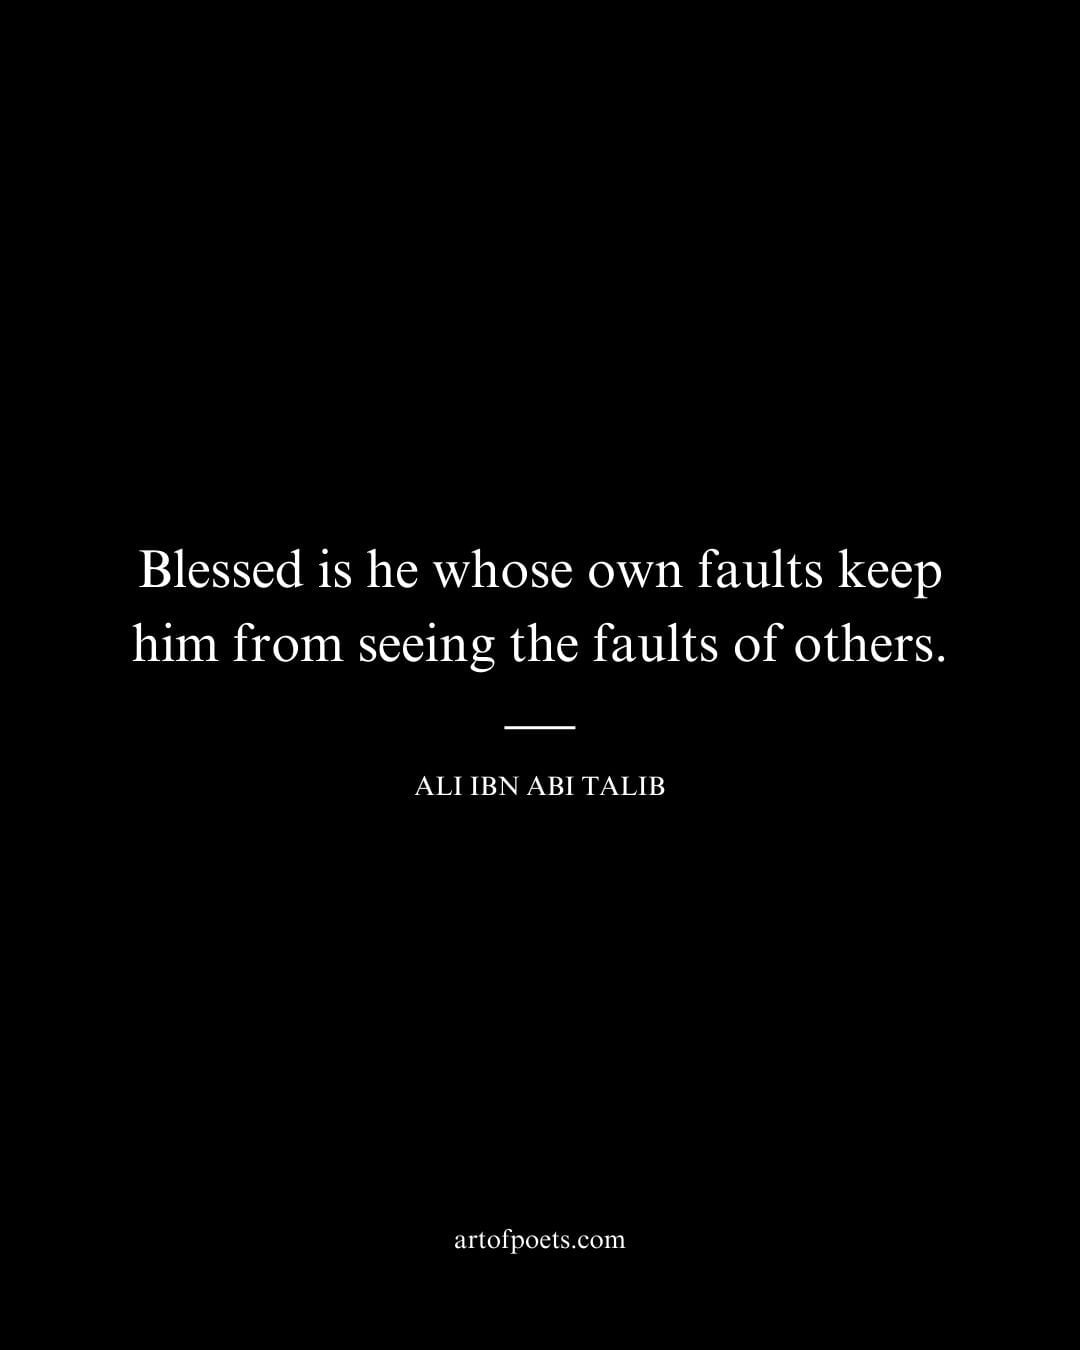 Blessed is he whose own faults keep him from seeing the faults of others